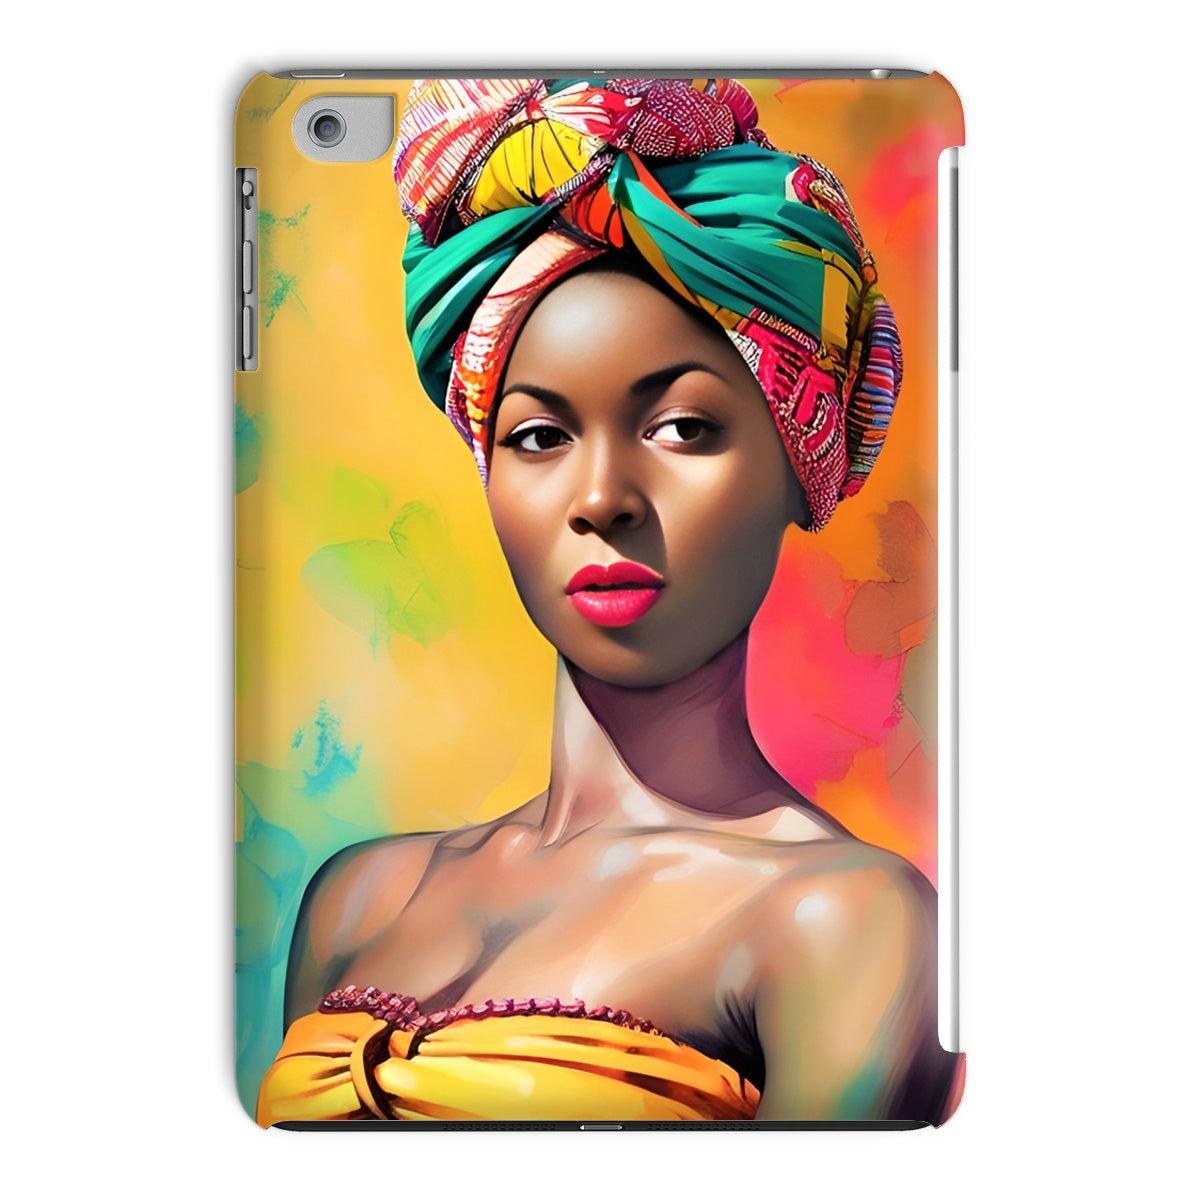 Goddess Good-Looking Tablet Cases